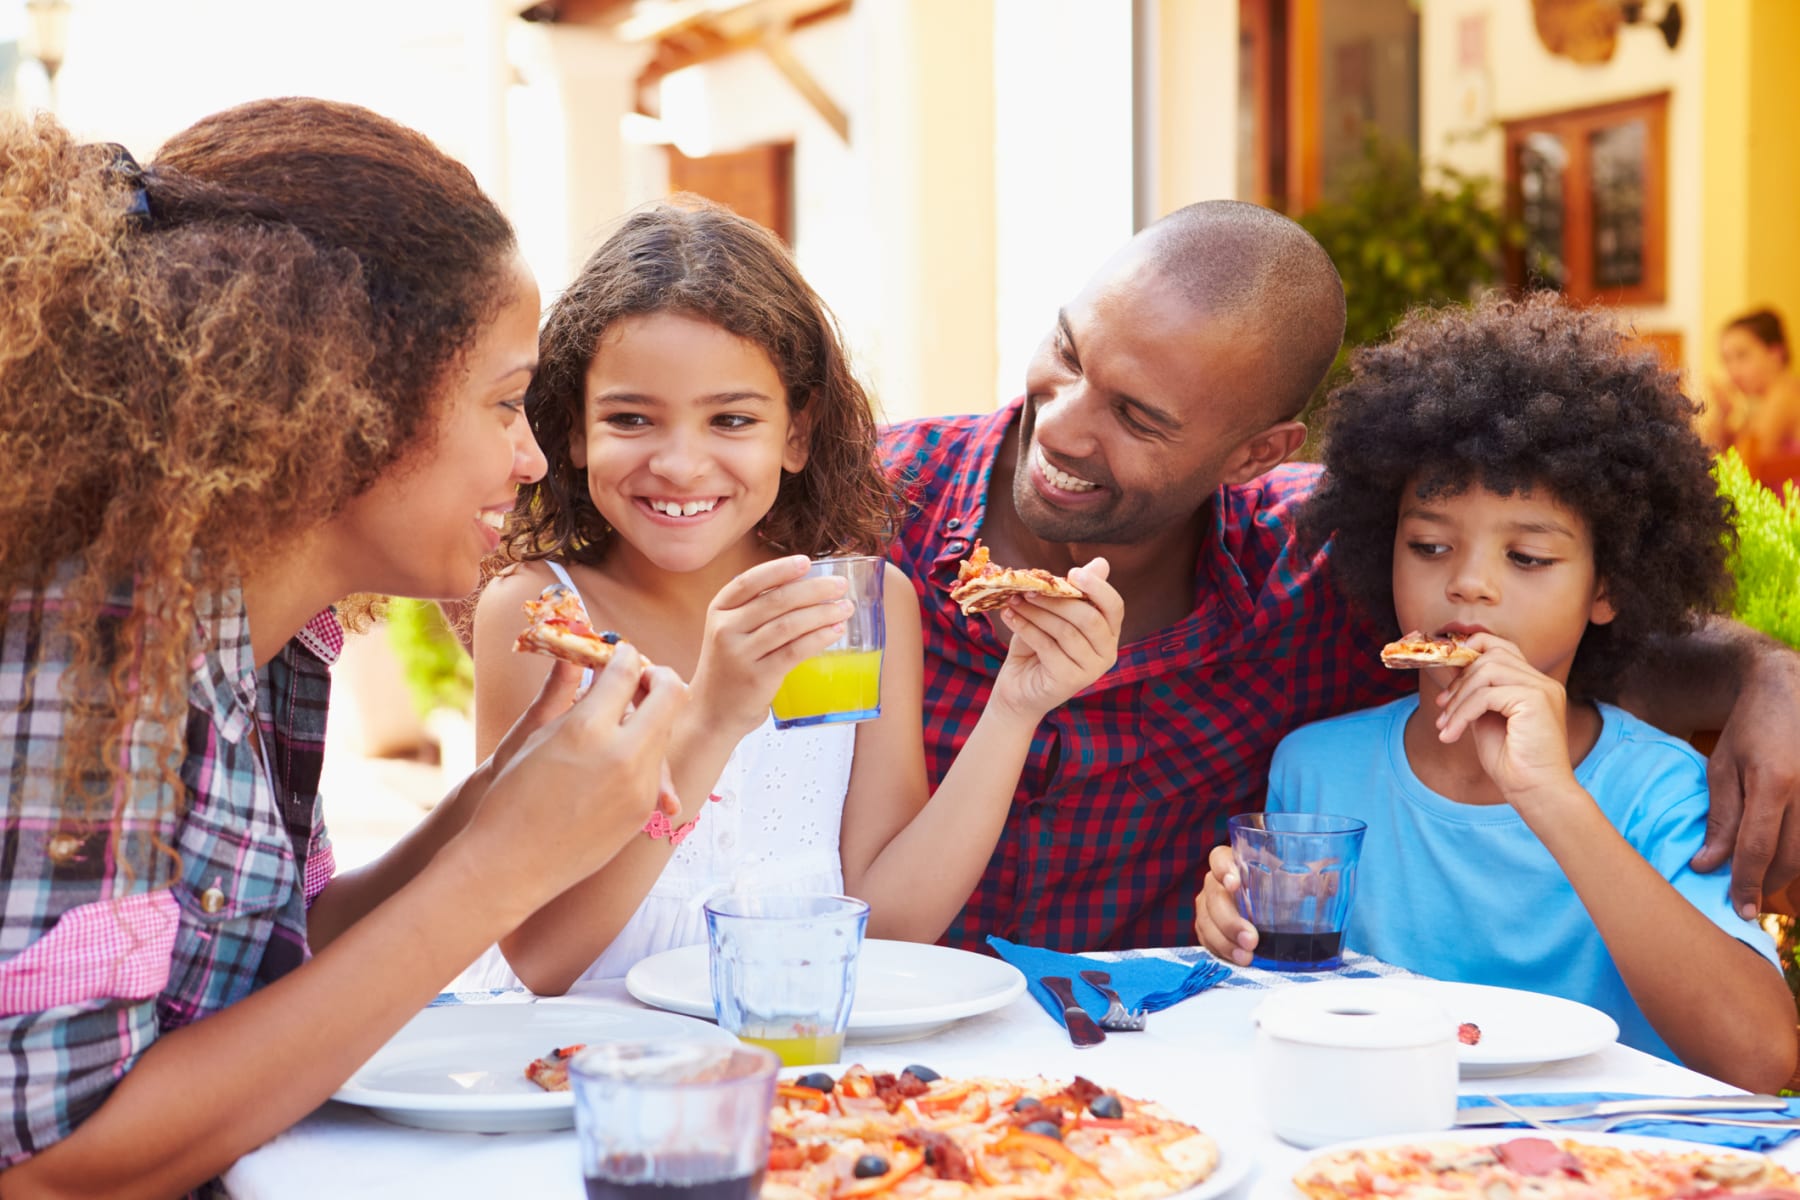 Family eats pizza together at outdoor restaurant.